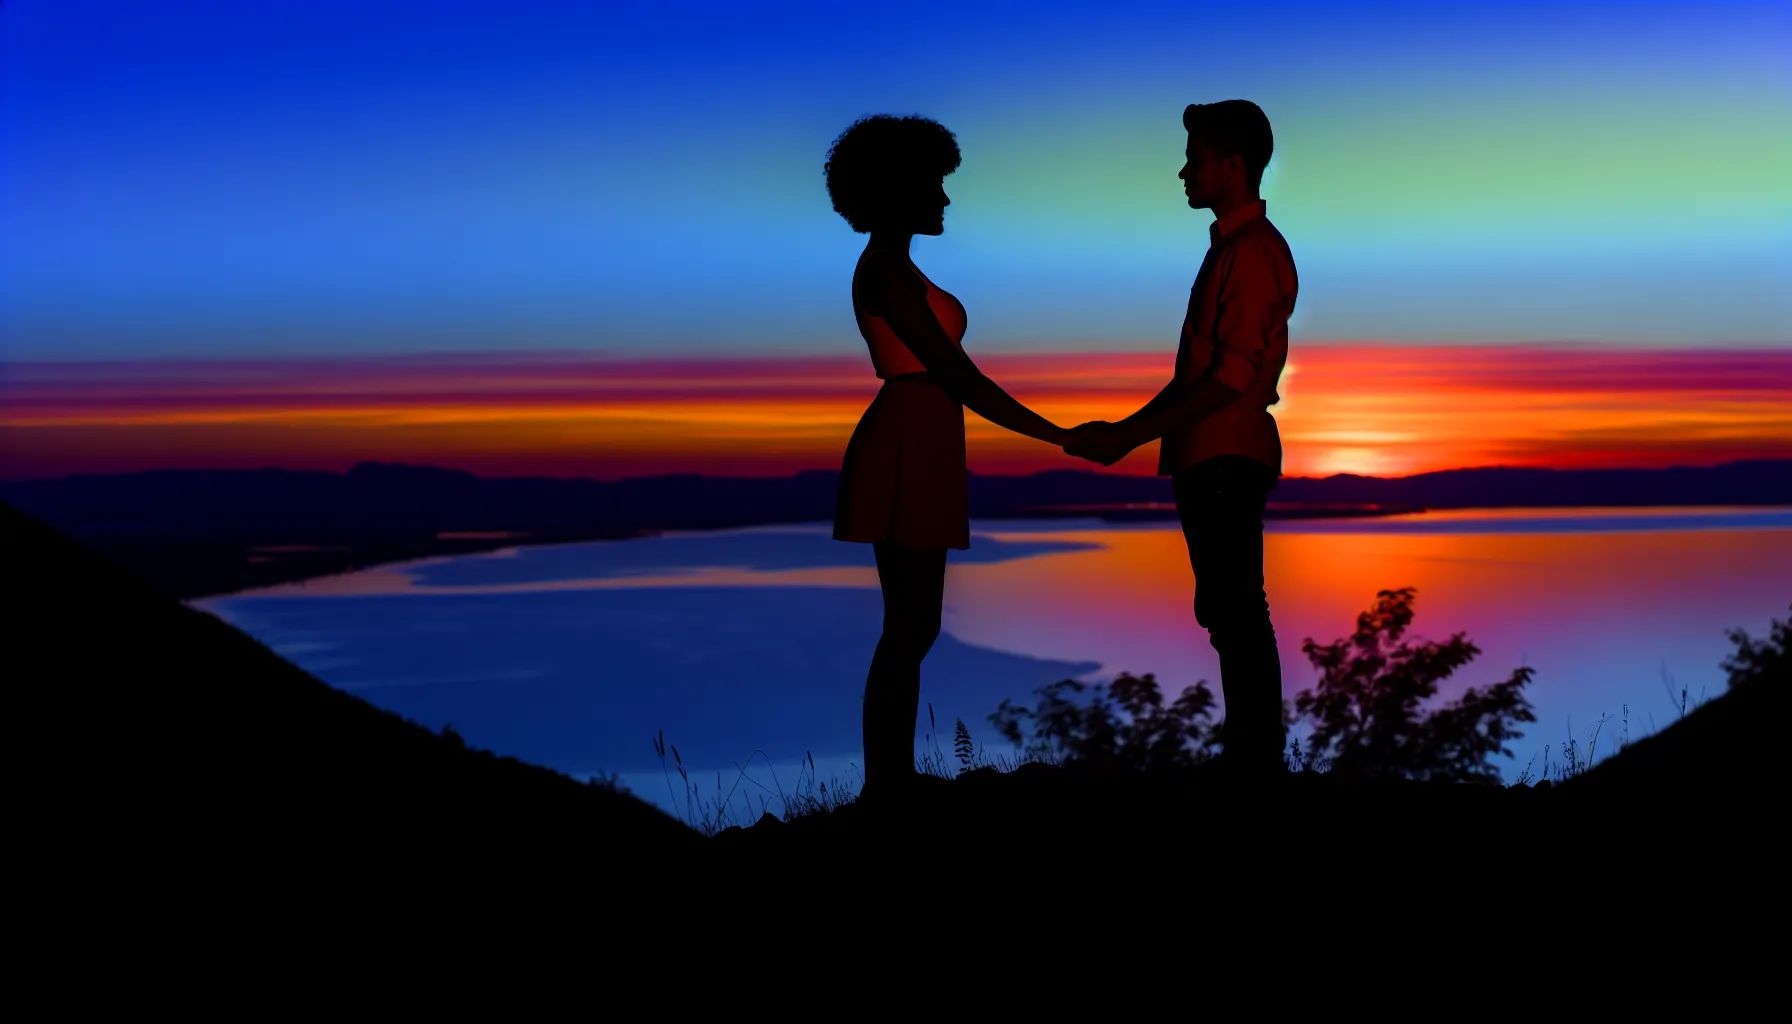 <strong>As daylight wanes, love's light shines brightest</strong>—a couple's silhouette against the tranquil canvas of nature whispers tales of affection and companionship, painting the horizon with the colors of their bond.